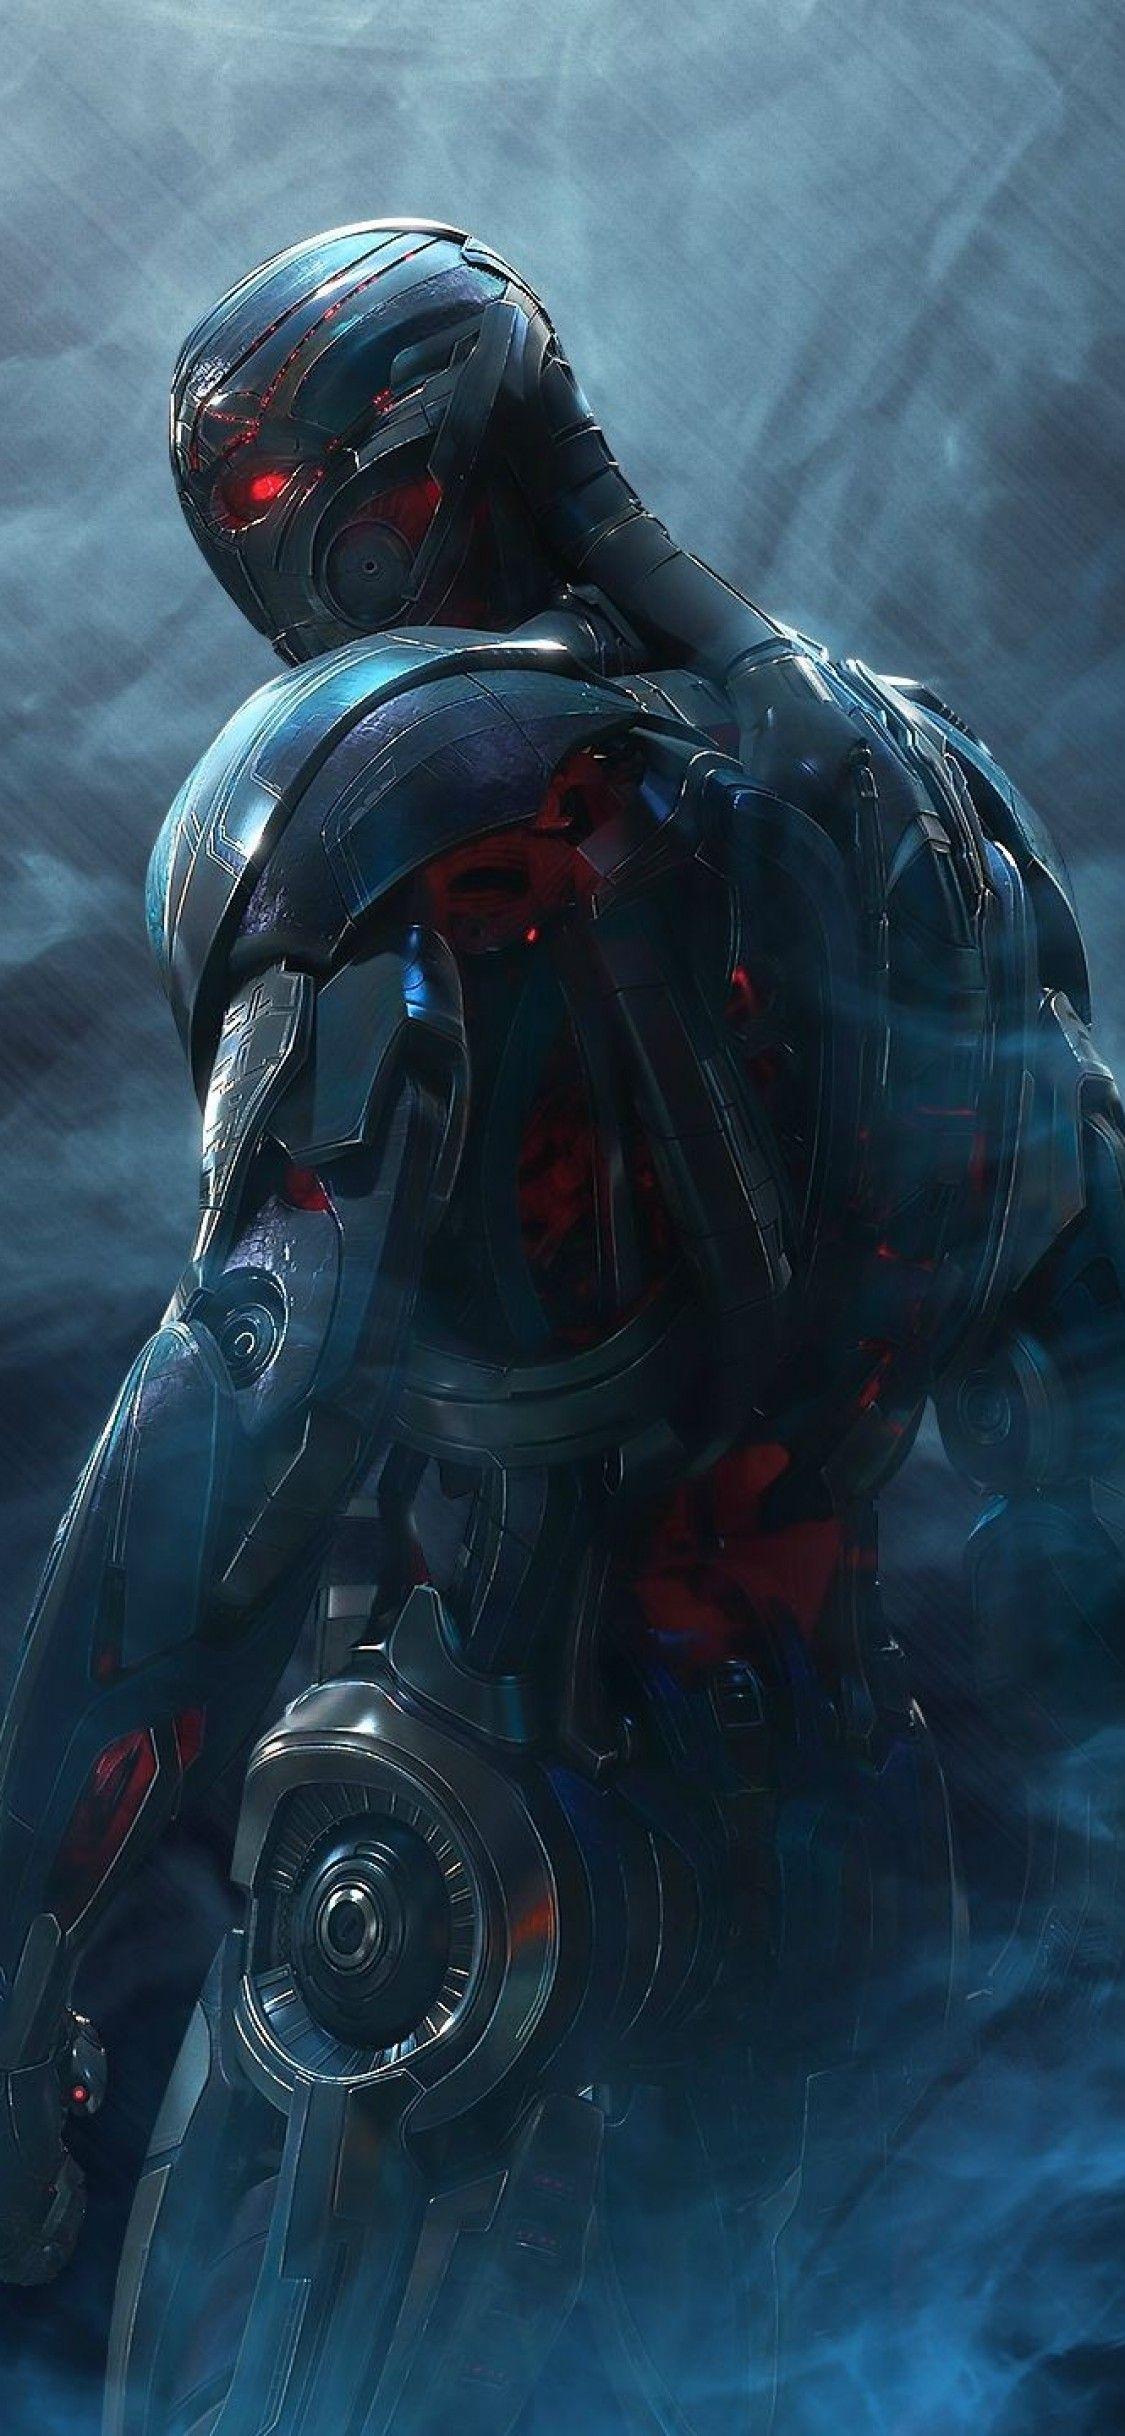 The Avengers iPhone X Wallpaper Download. Ultron marvel